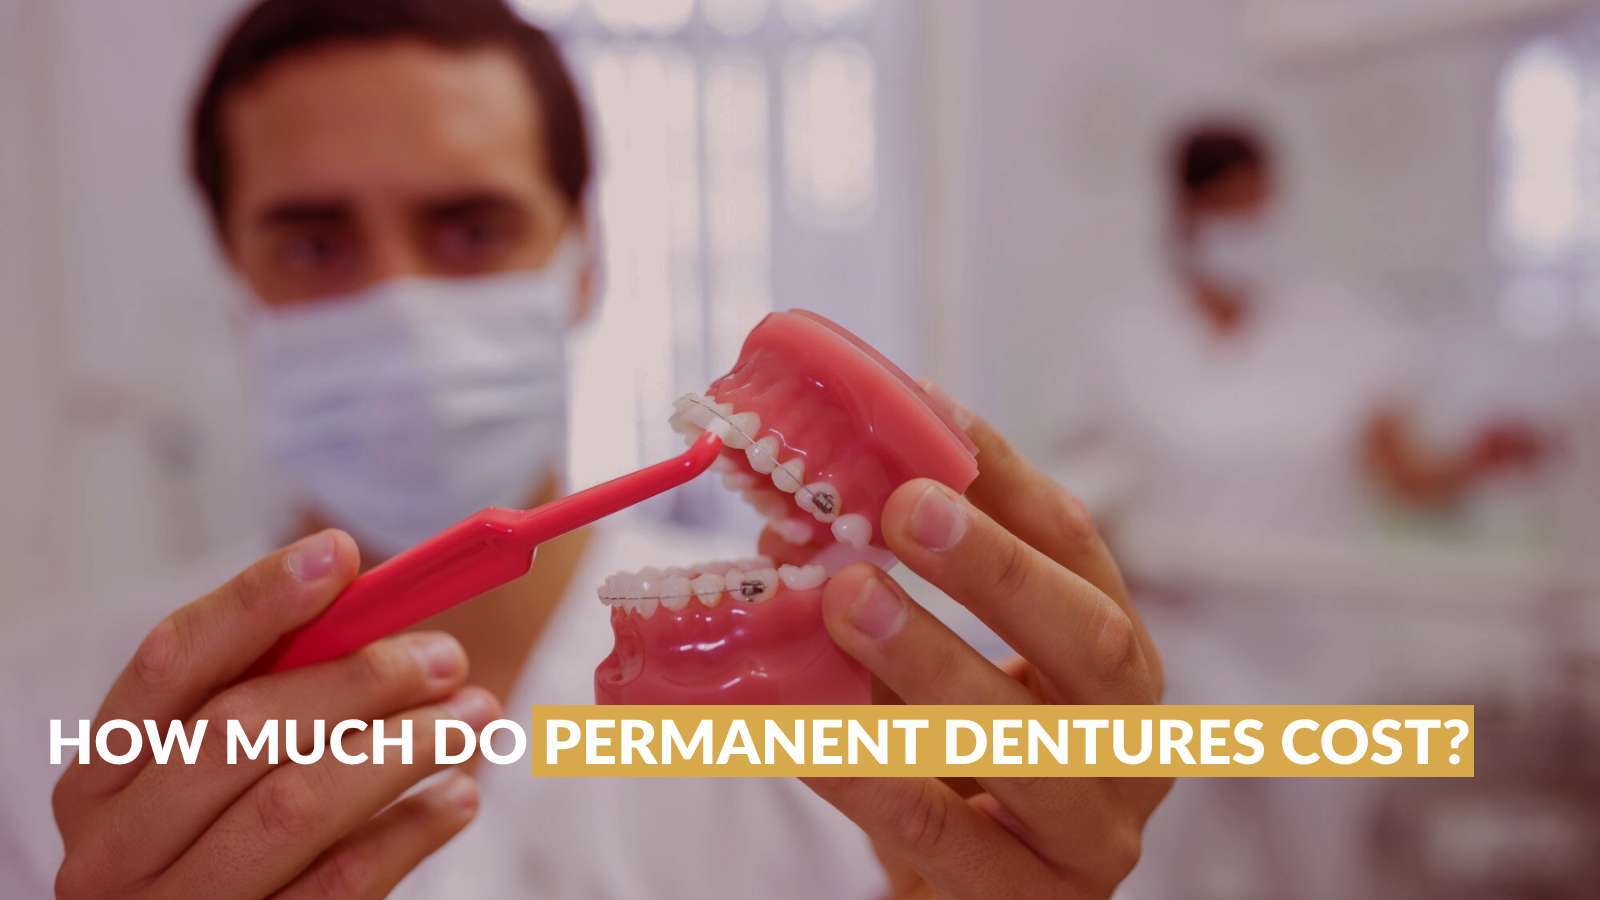 How Much Do Permanent Dentures Cost